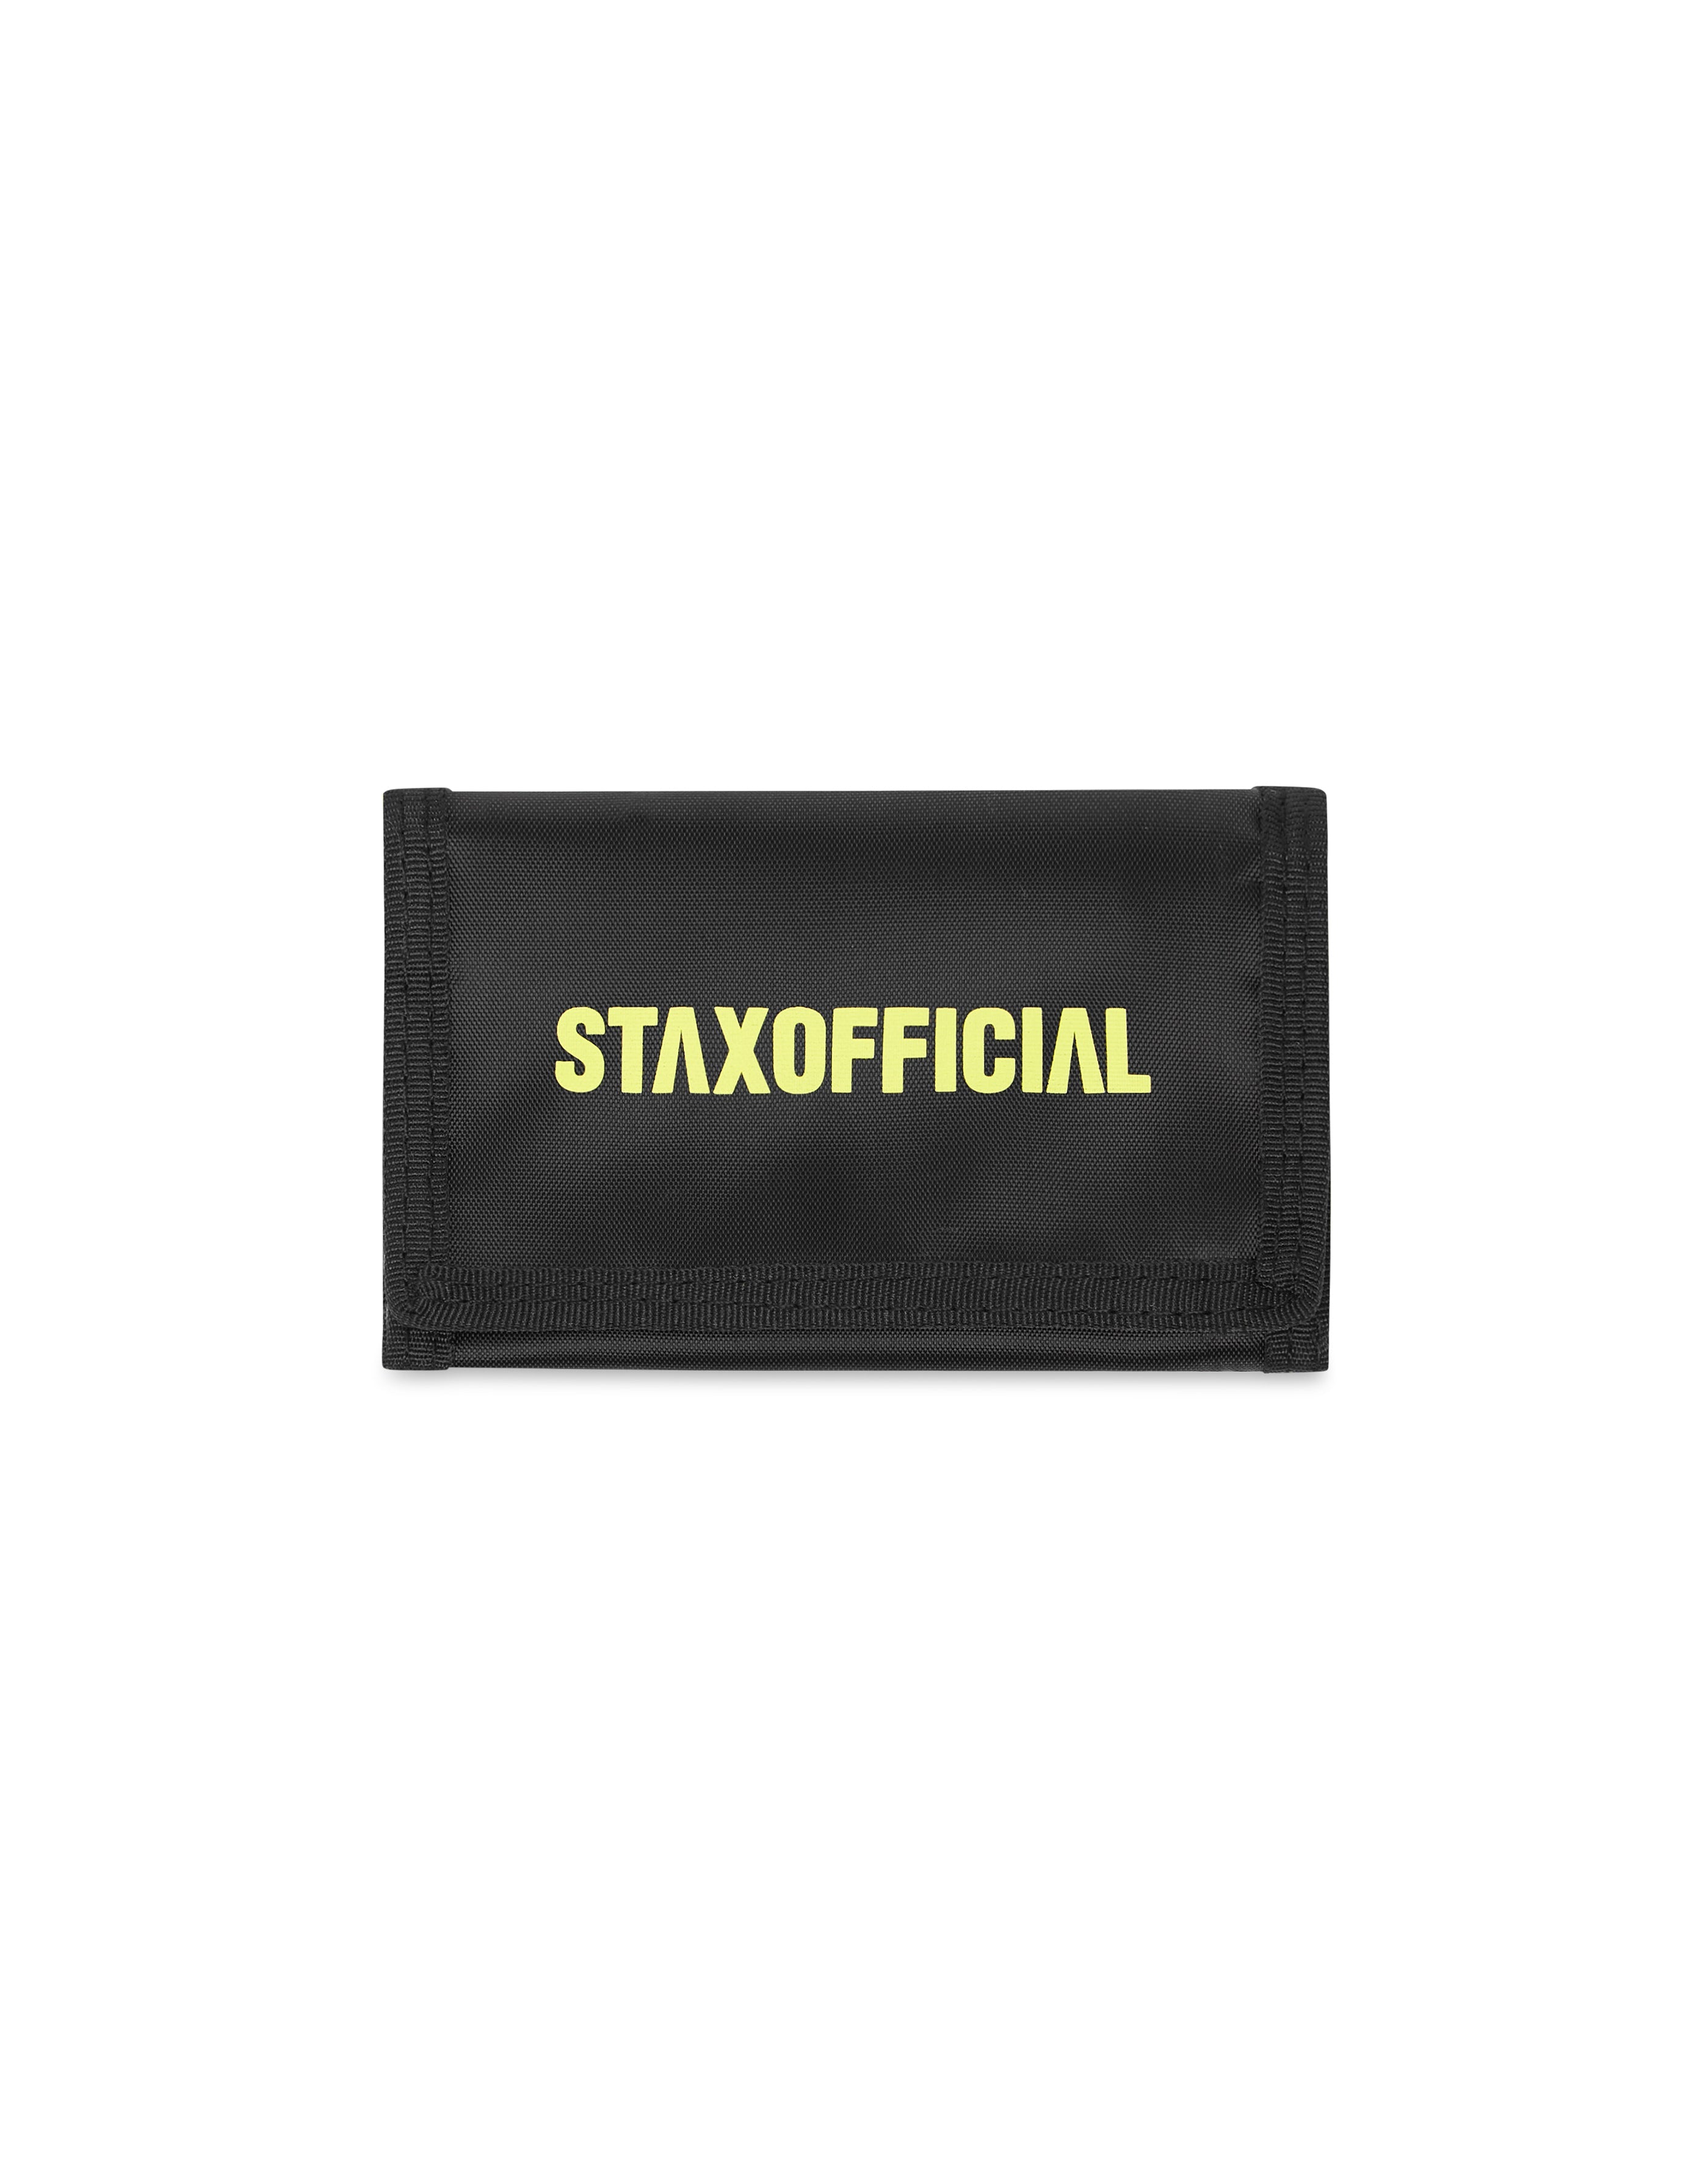 staxofficial-velcro-wallet-black-yellow